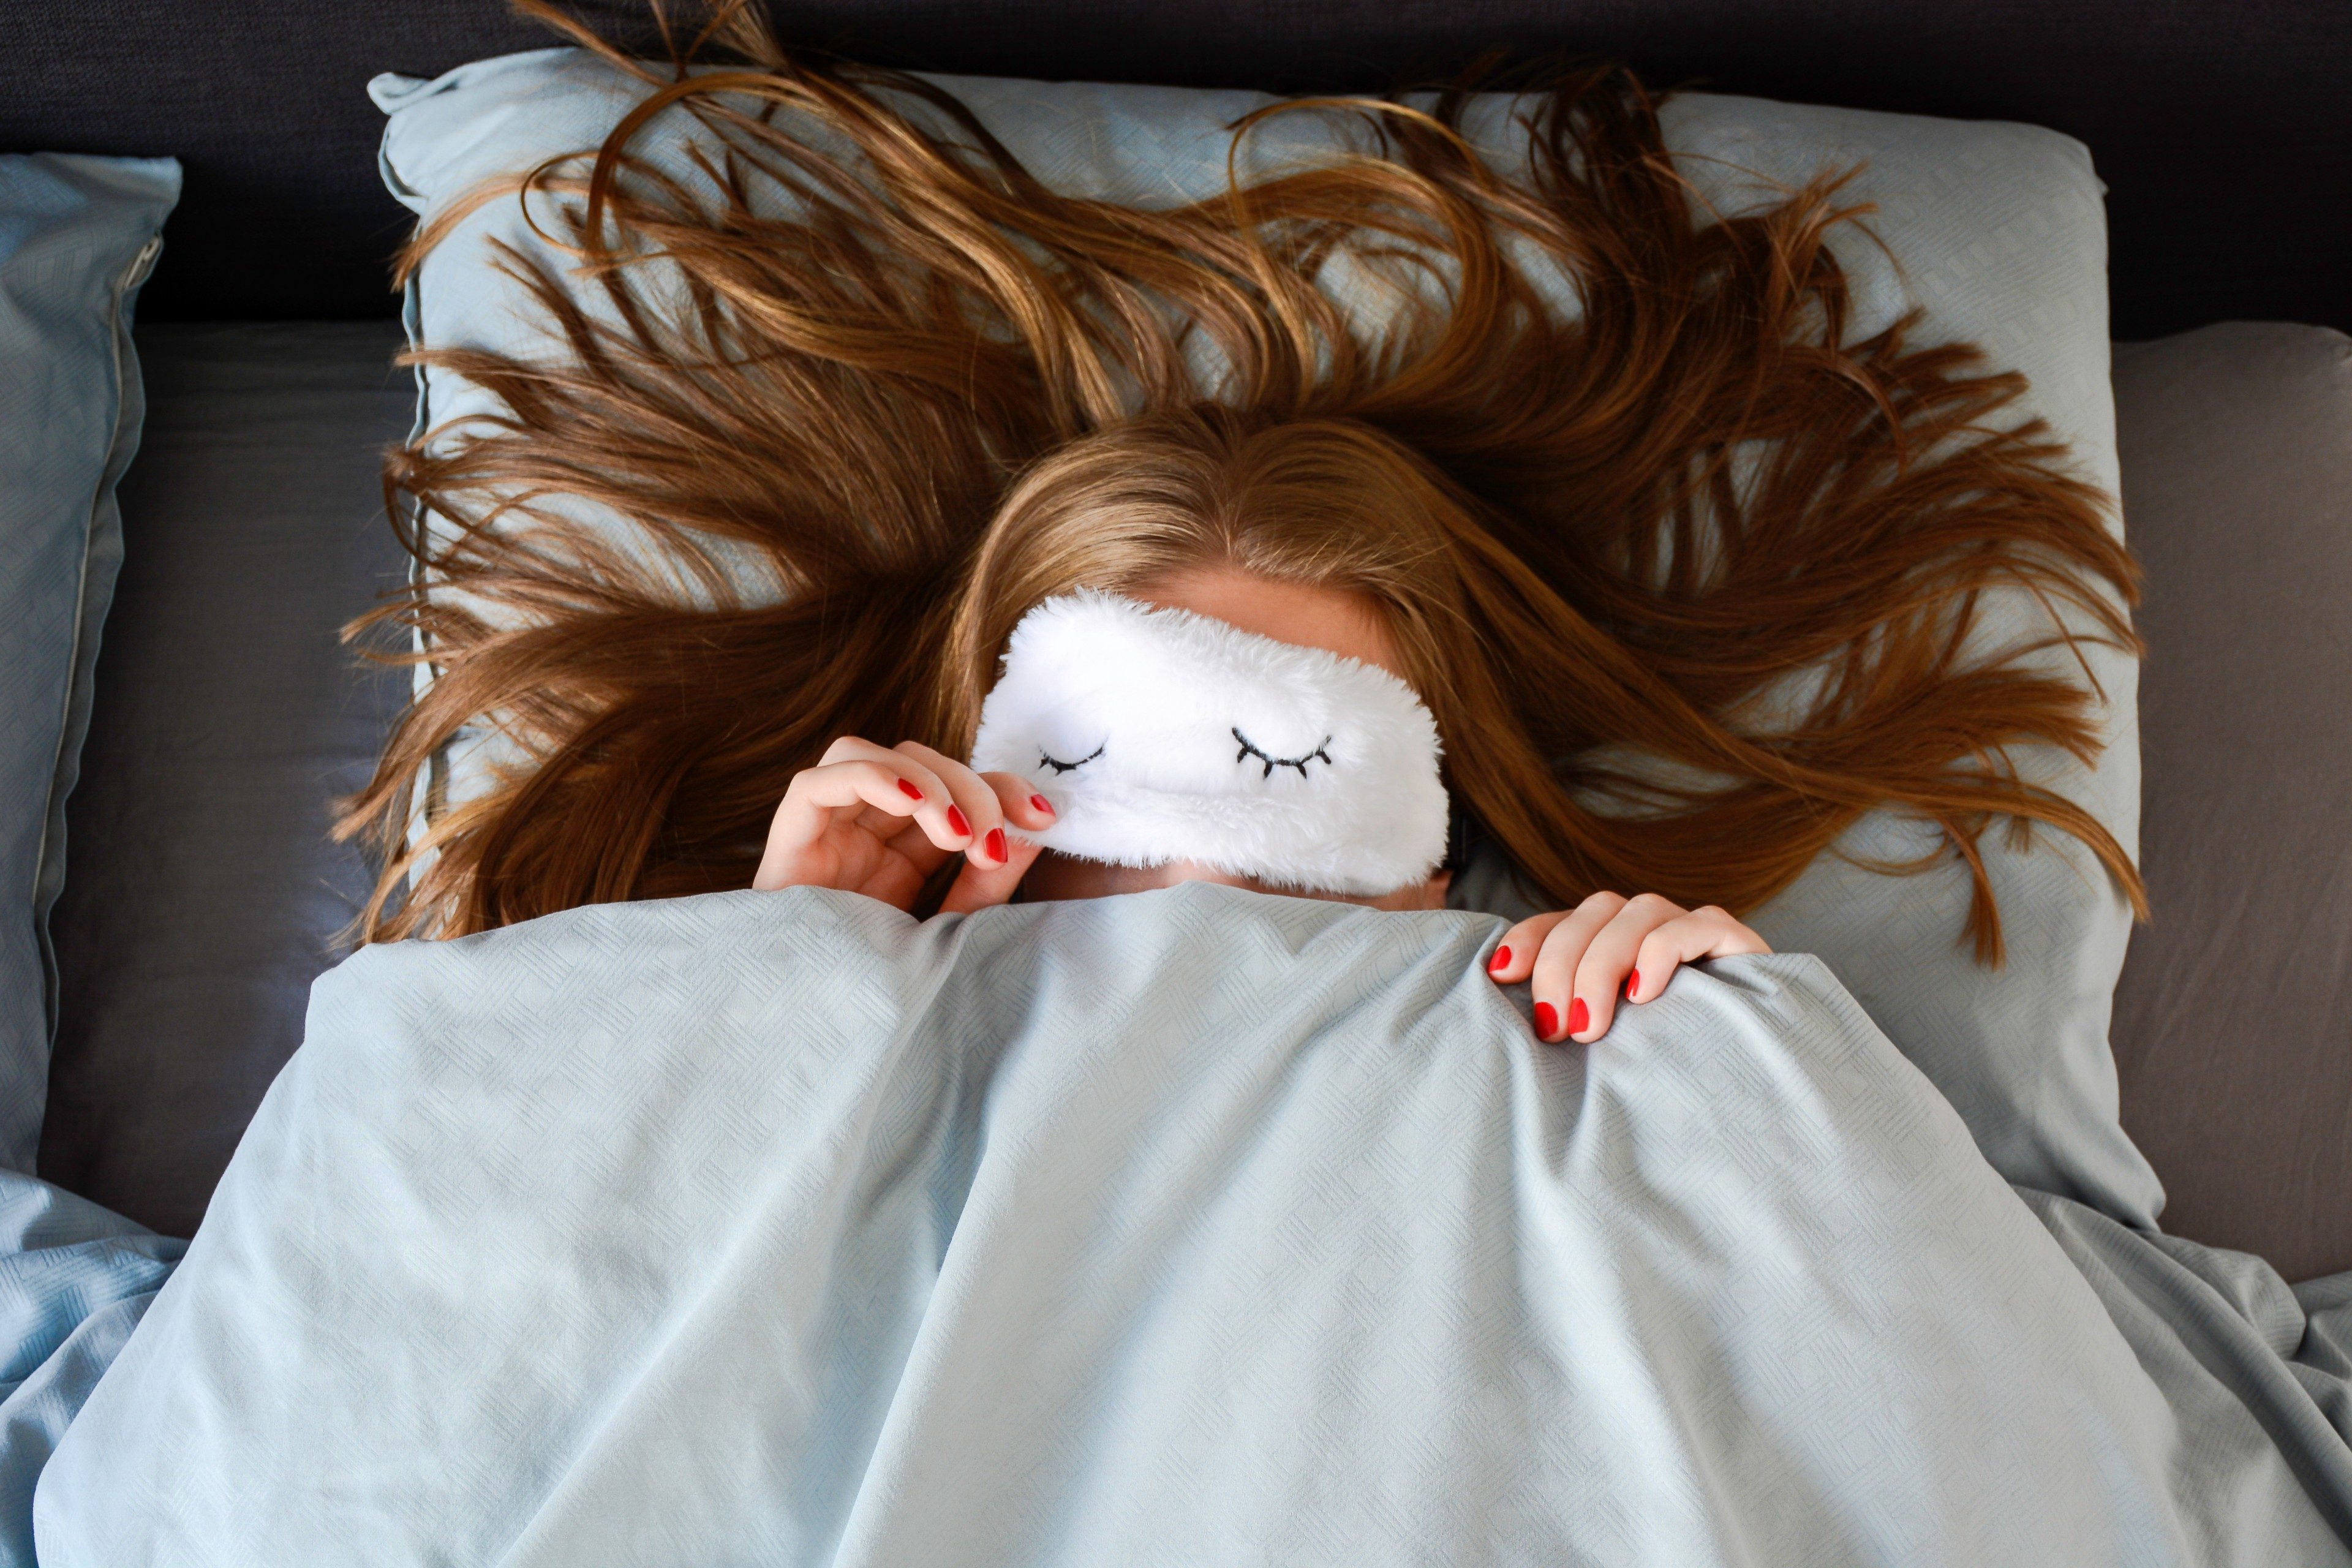 Young woman with long hair and a red manicure is sleeping in bed with sleep mask and peeking from underneath the sleeping mask